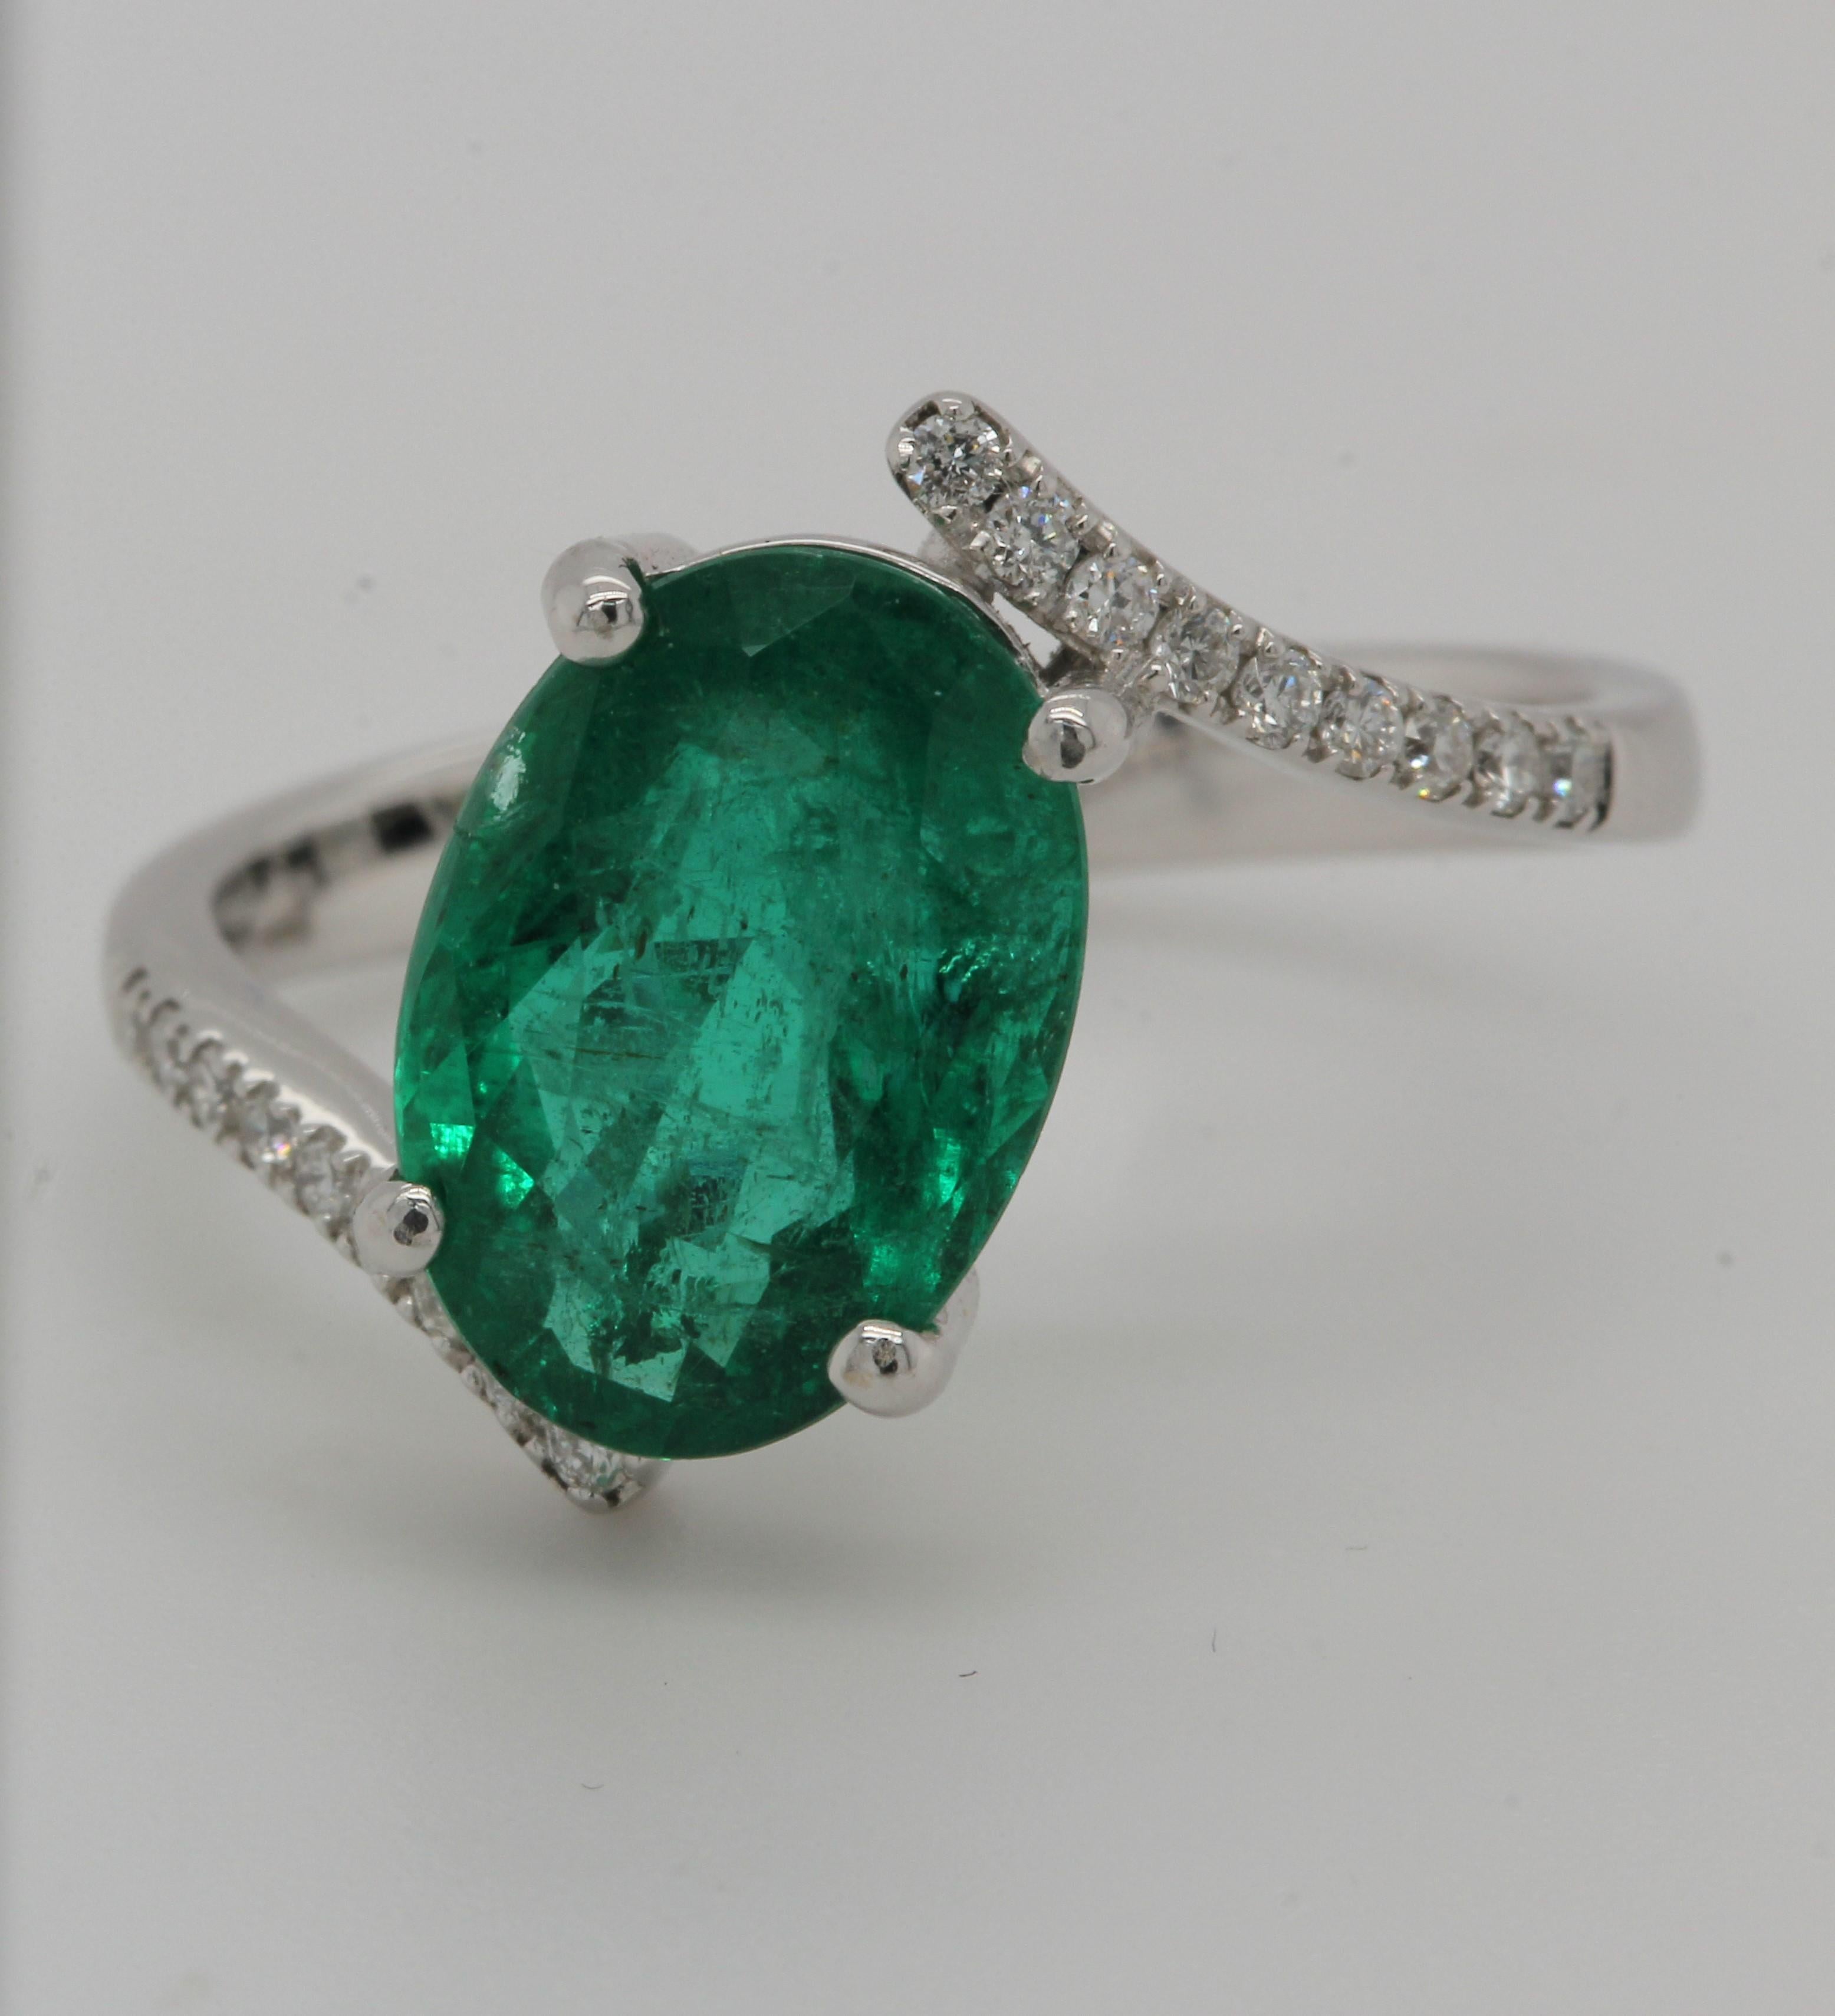 A perfect gift for a loved one, this emerald and diamond ring makes a strong statement. It's crafted from 18K white gold to be strong and sturdy, but with the elegance of a fine jewelry piece. The 3.07 carat oval emerald is surrounded by 0.14 carat